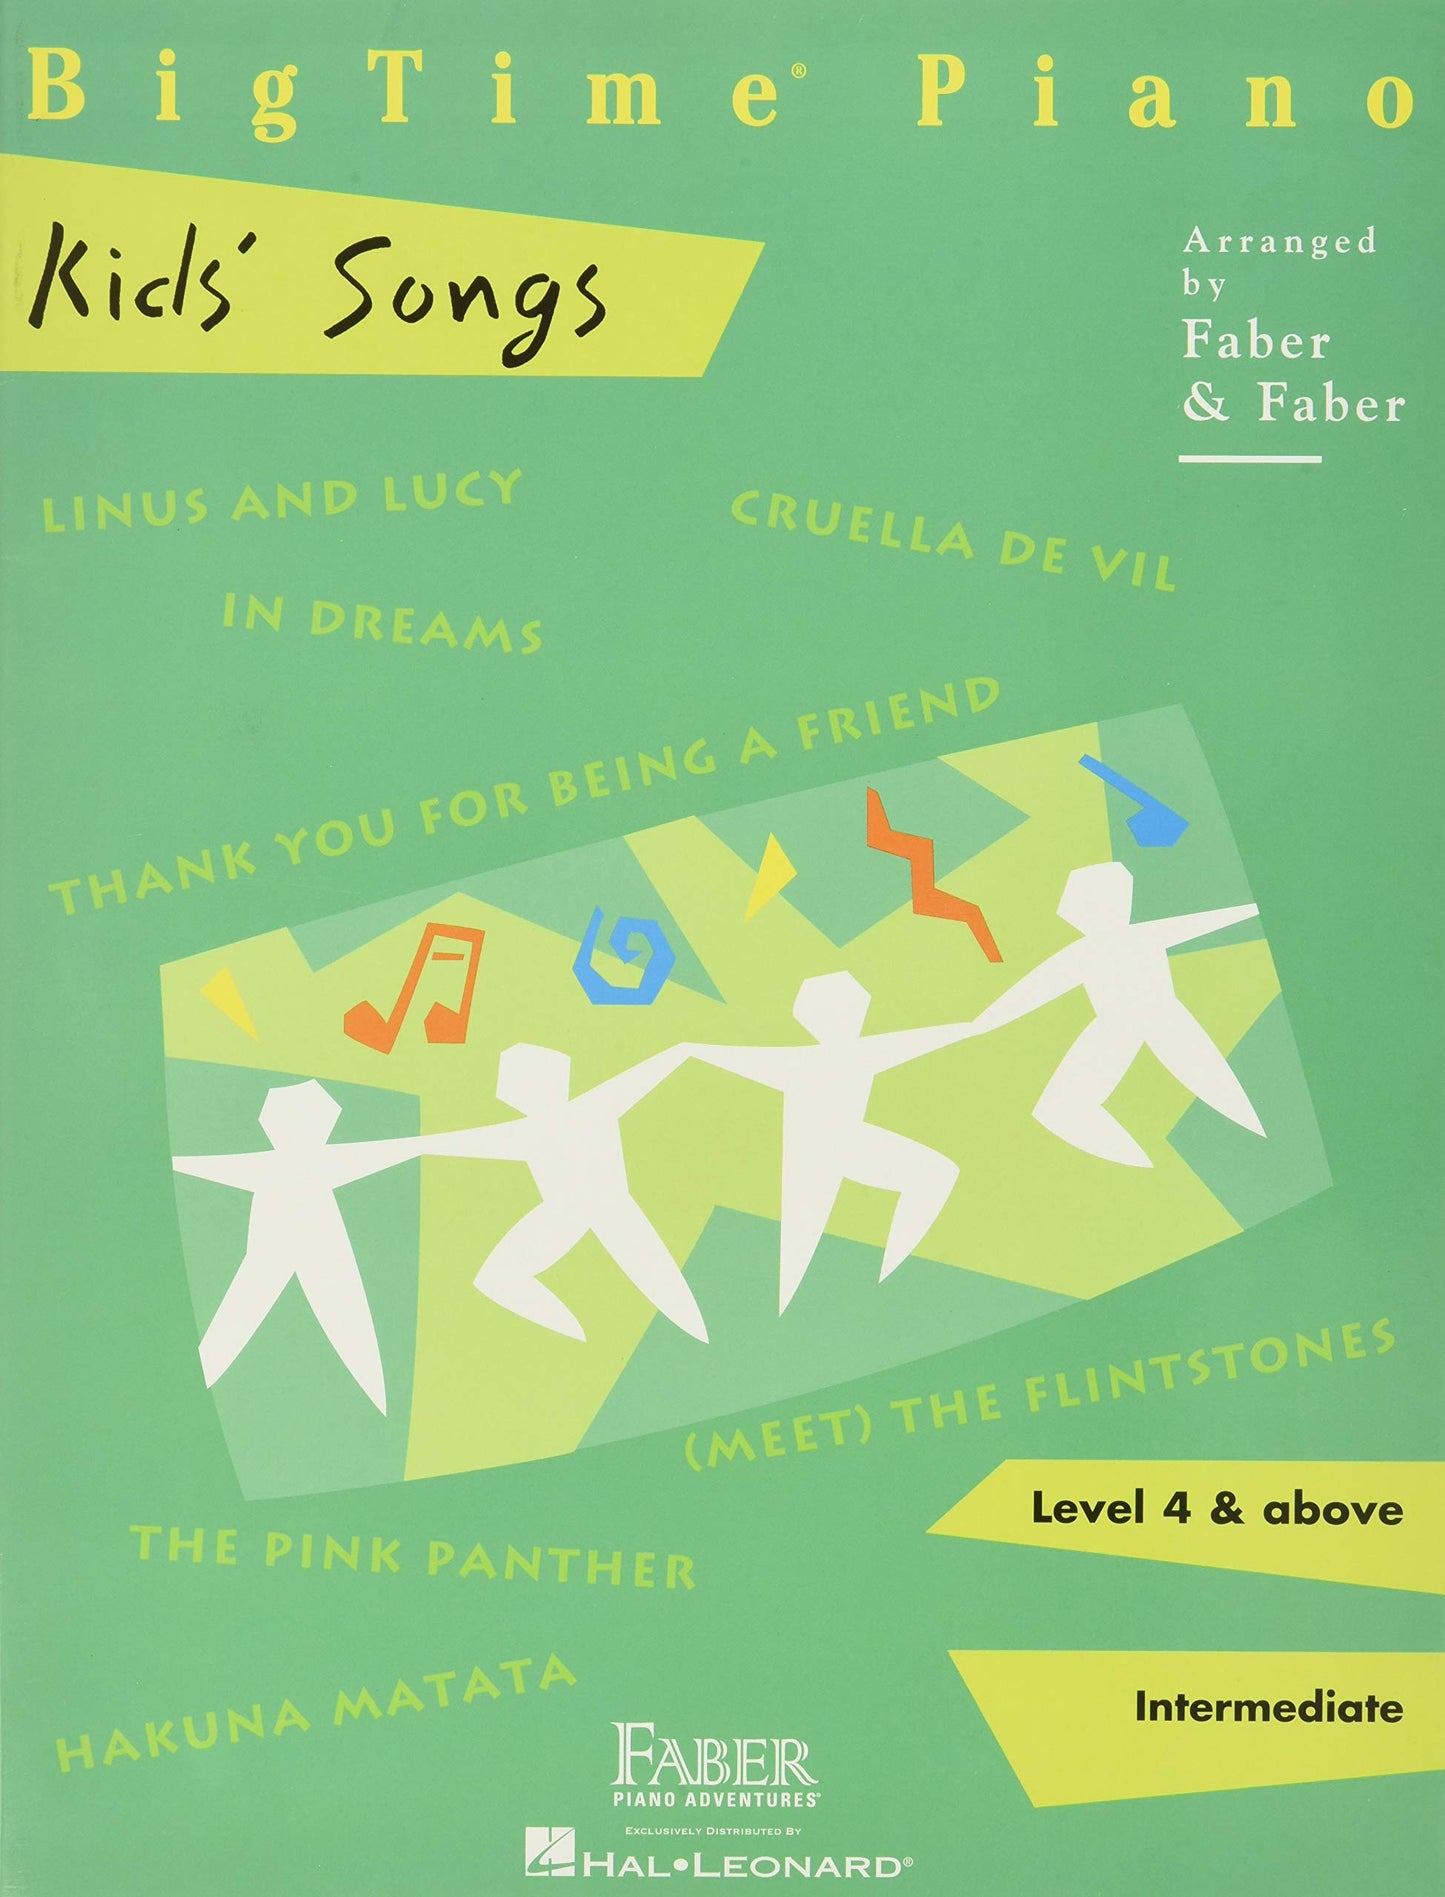 BigTime Piano - Kids' Songs, Level 4